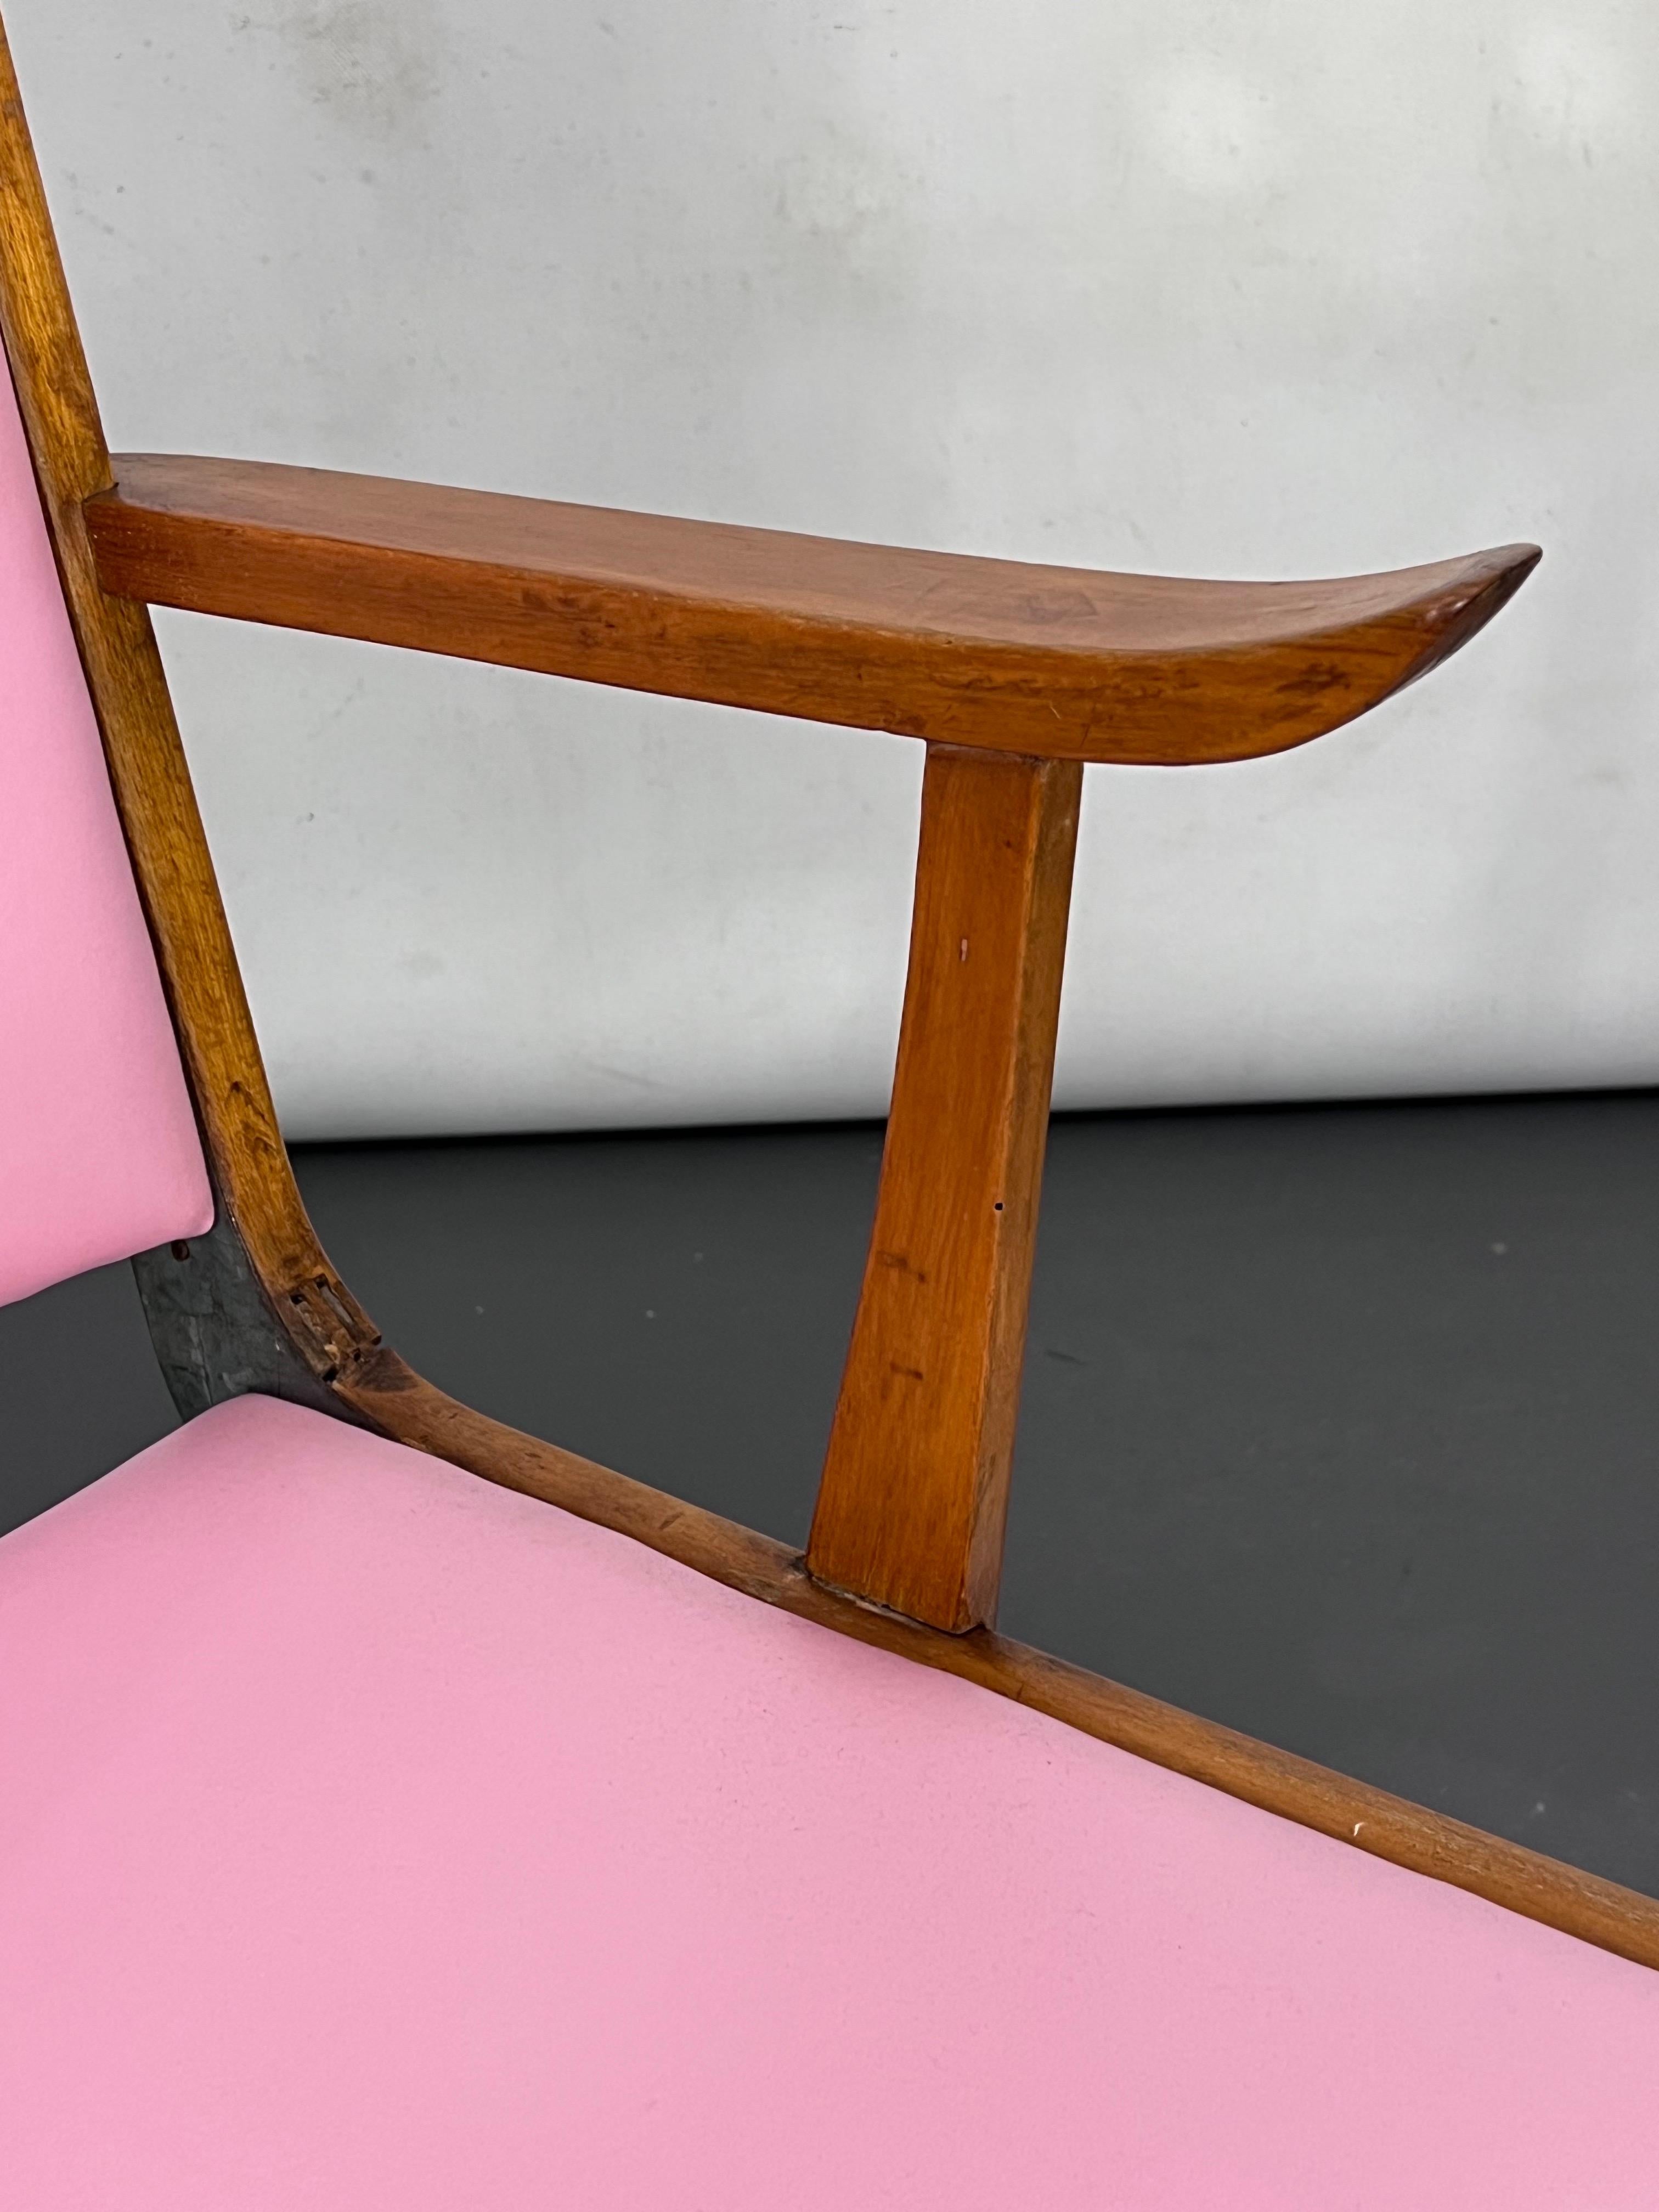 Vintage Italian Wood Accent Chair in Pink Leatherette, Italy, 1950s For Sale 3